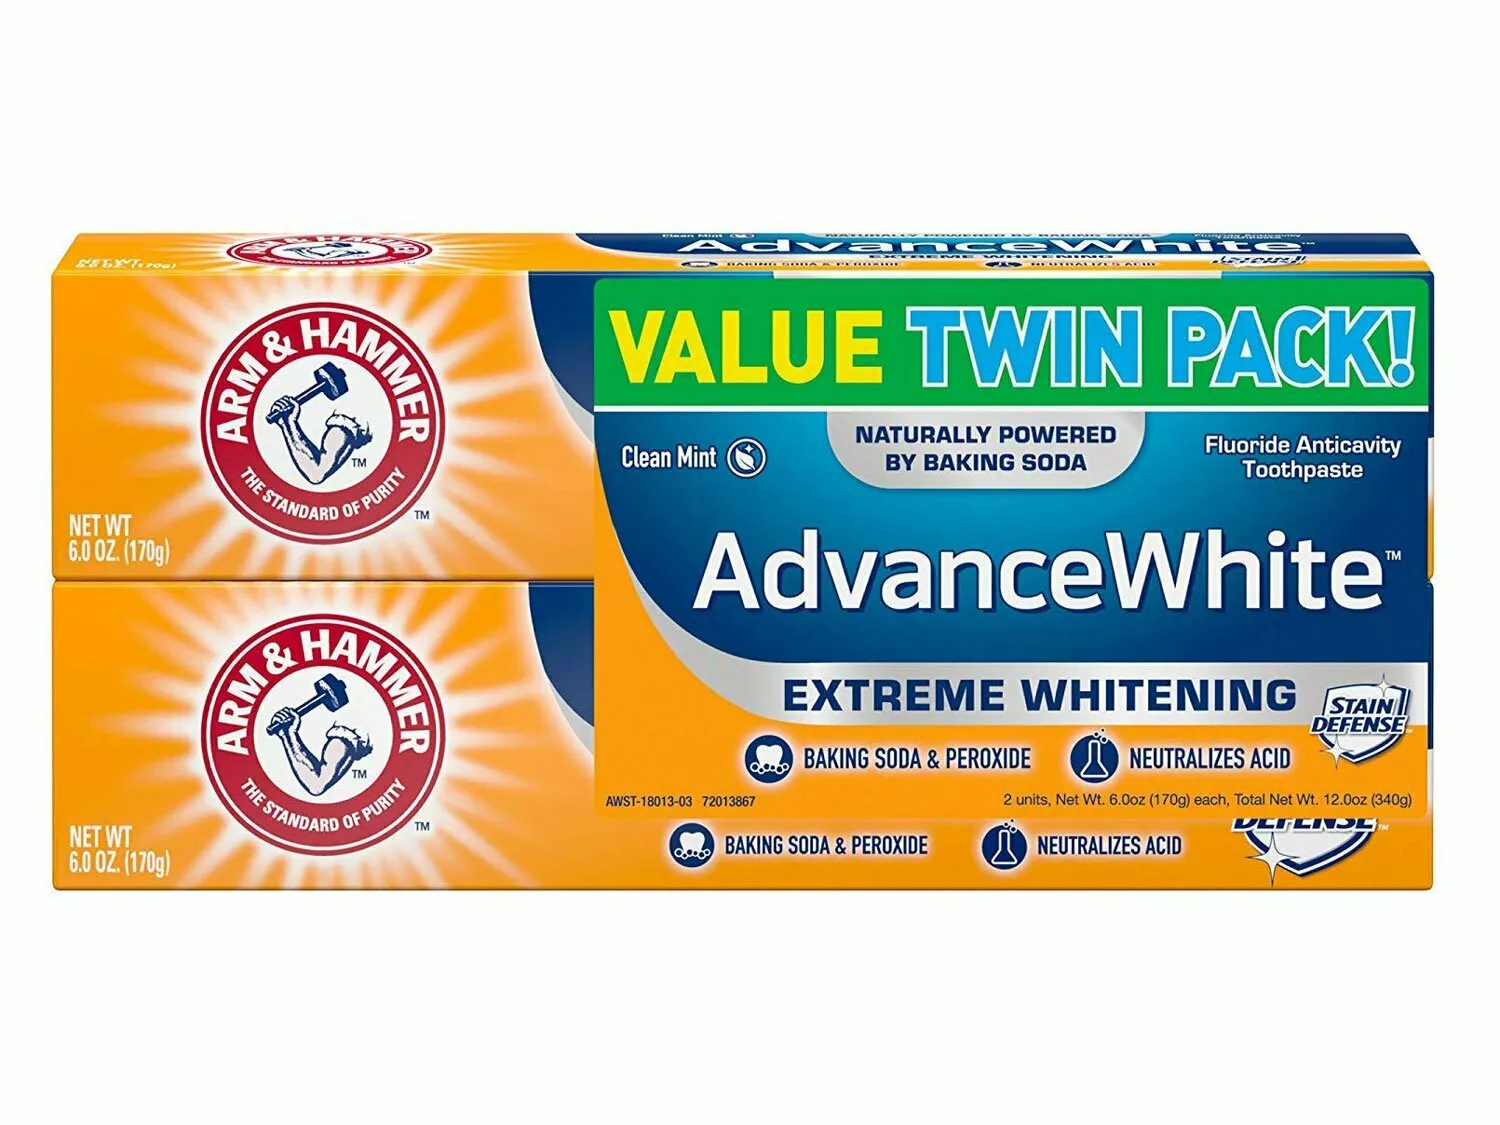 Arm & Hammer Advance White two-pack.